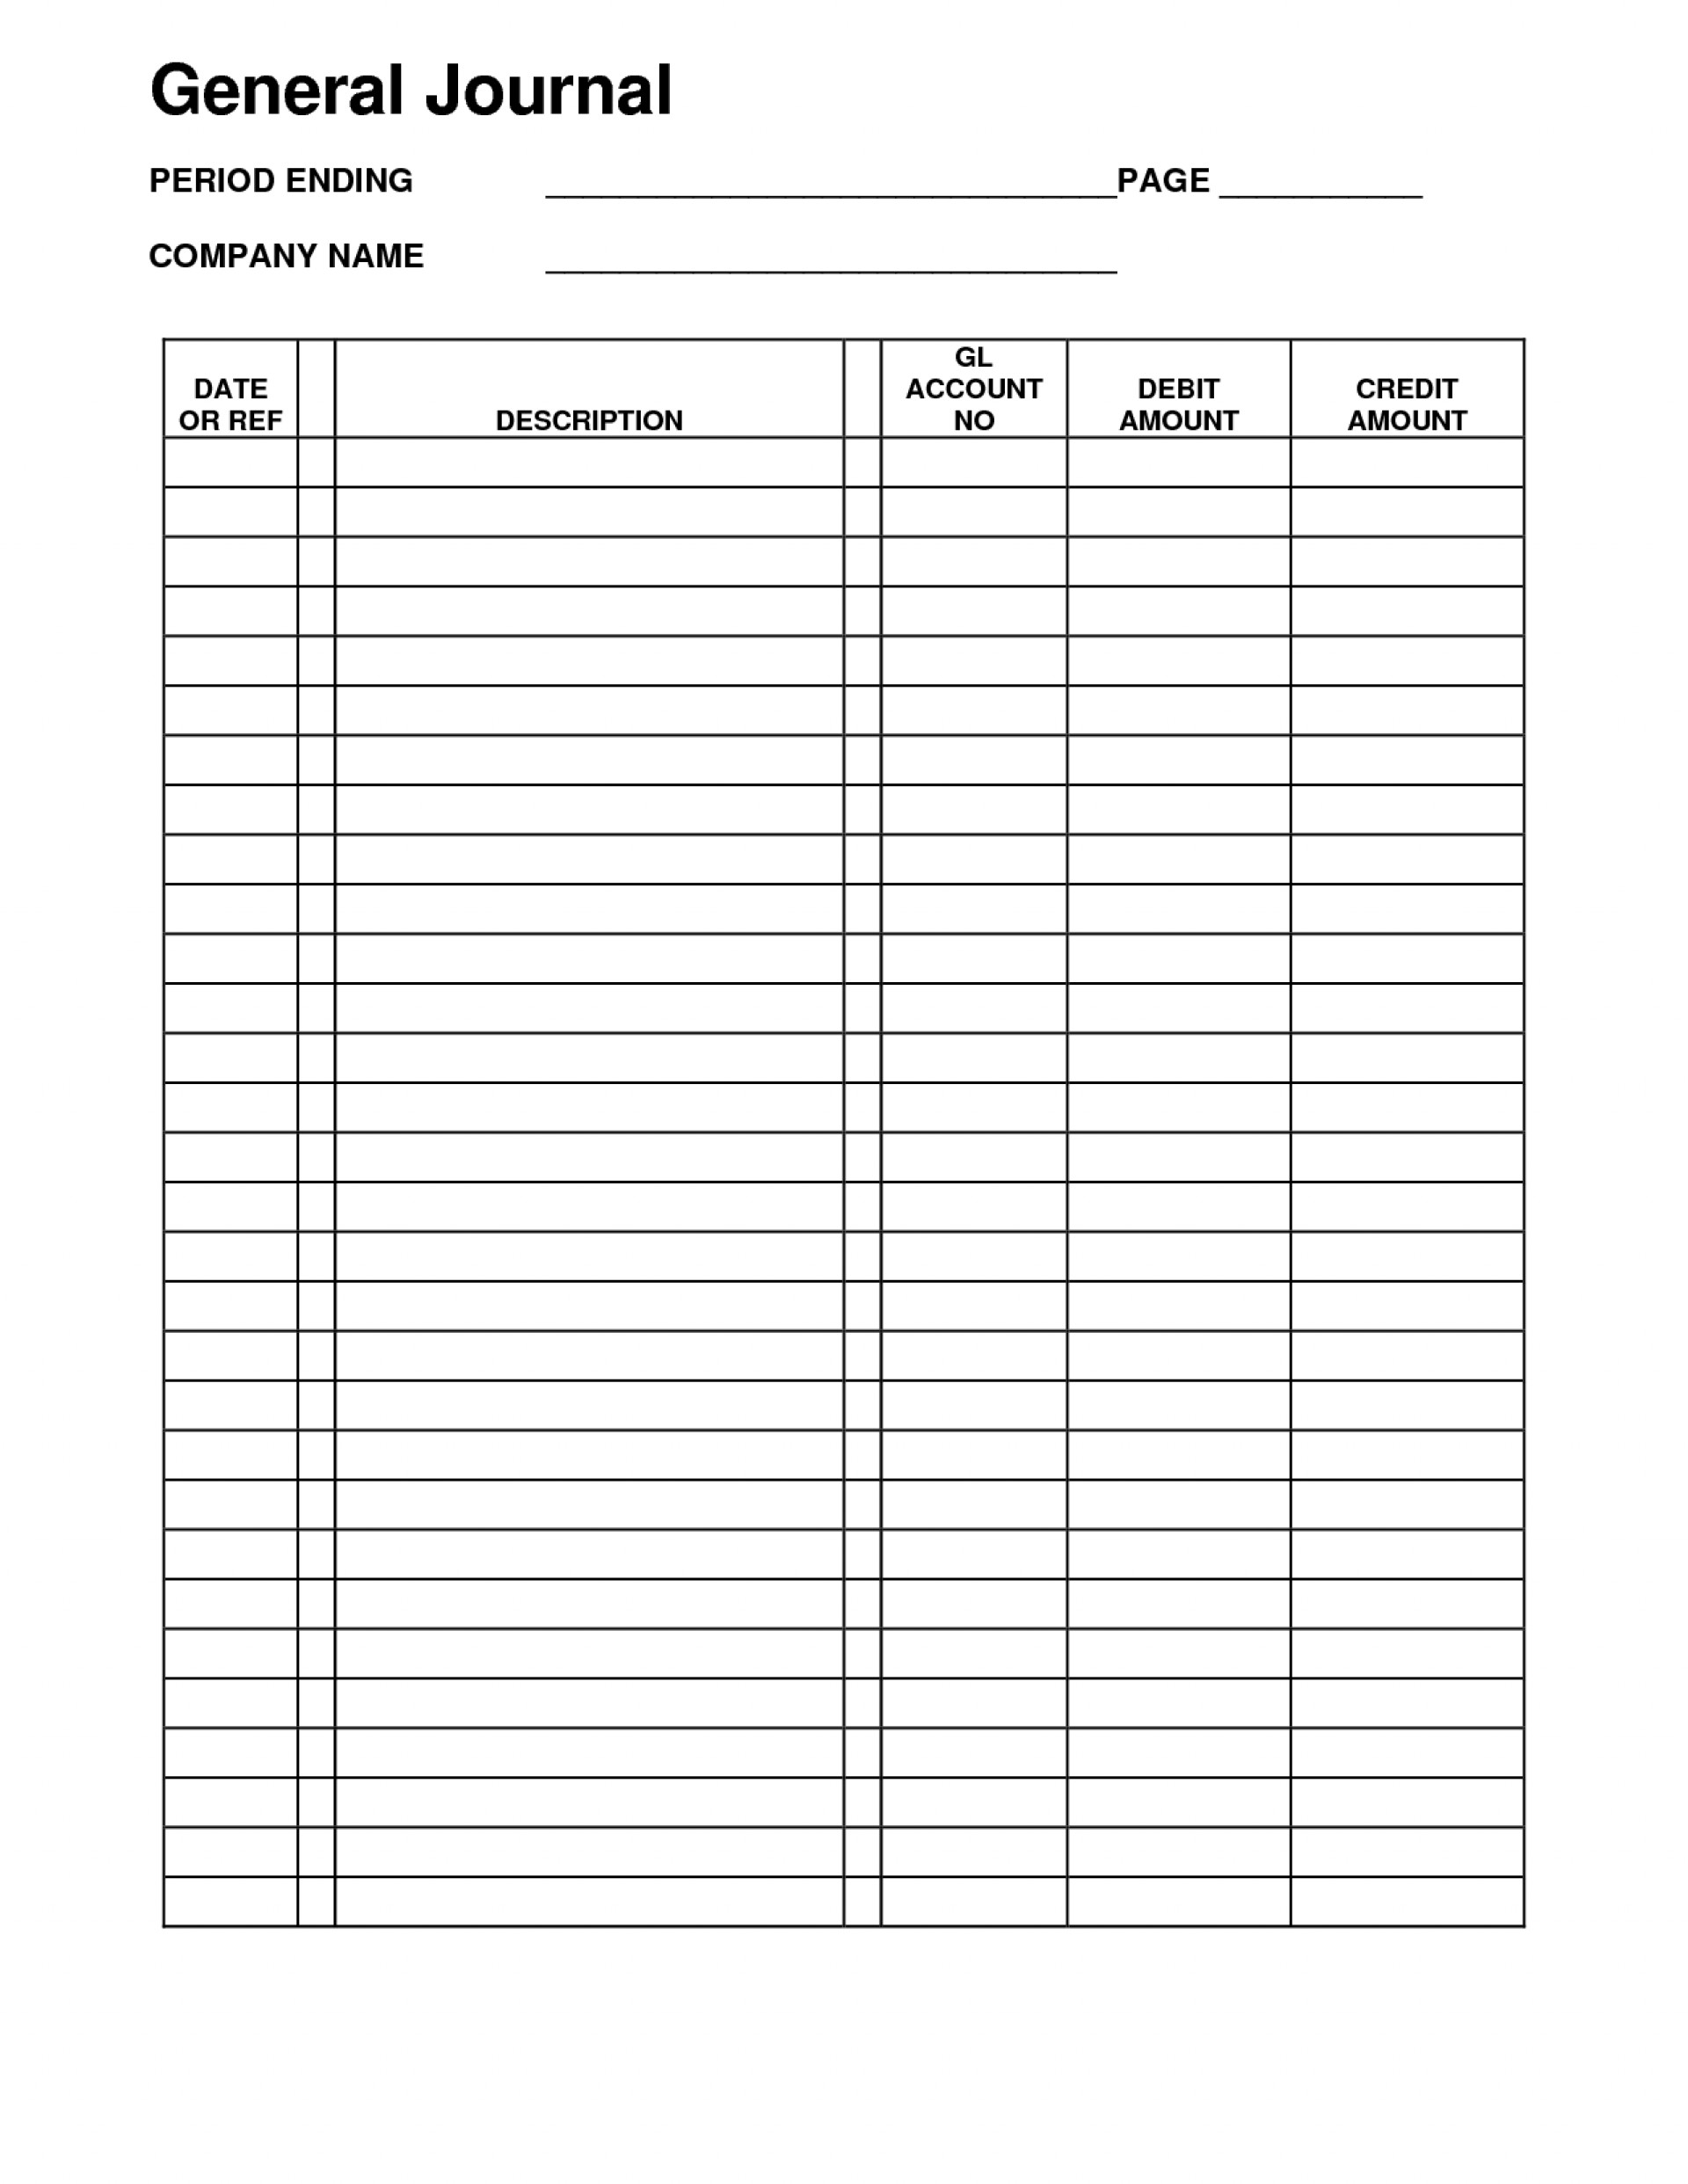 034 Journal Entry Template Excel Ideas Fascinating General Regarding Double Entry Journal Template For Word